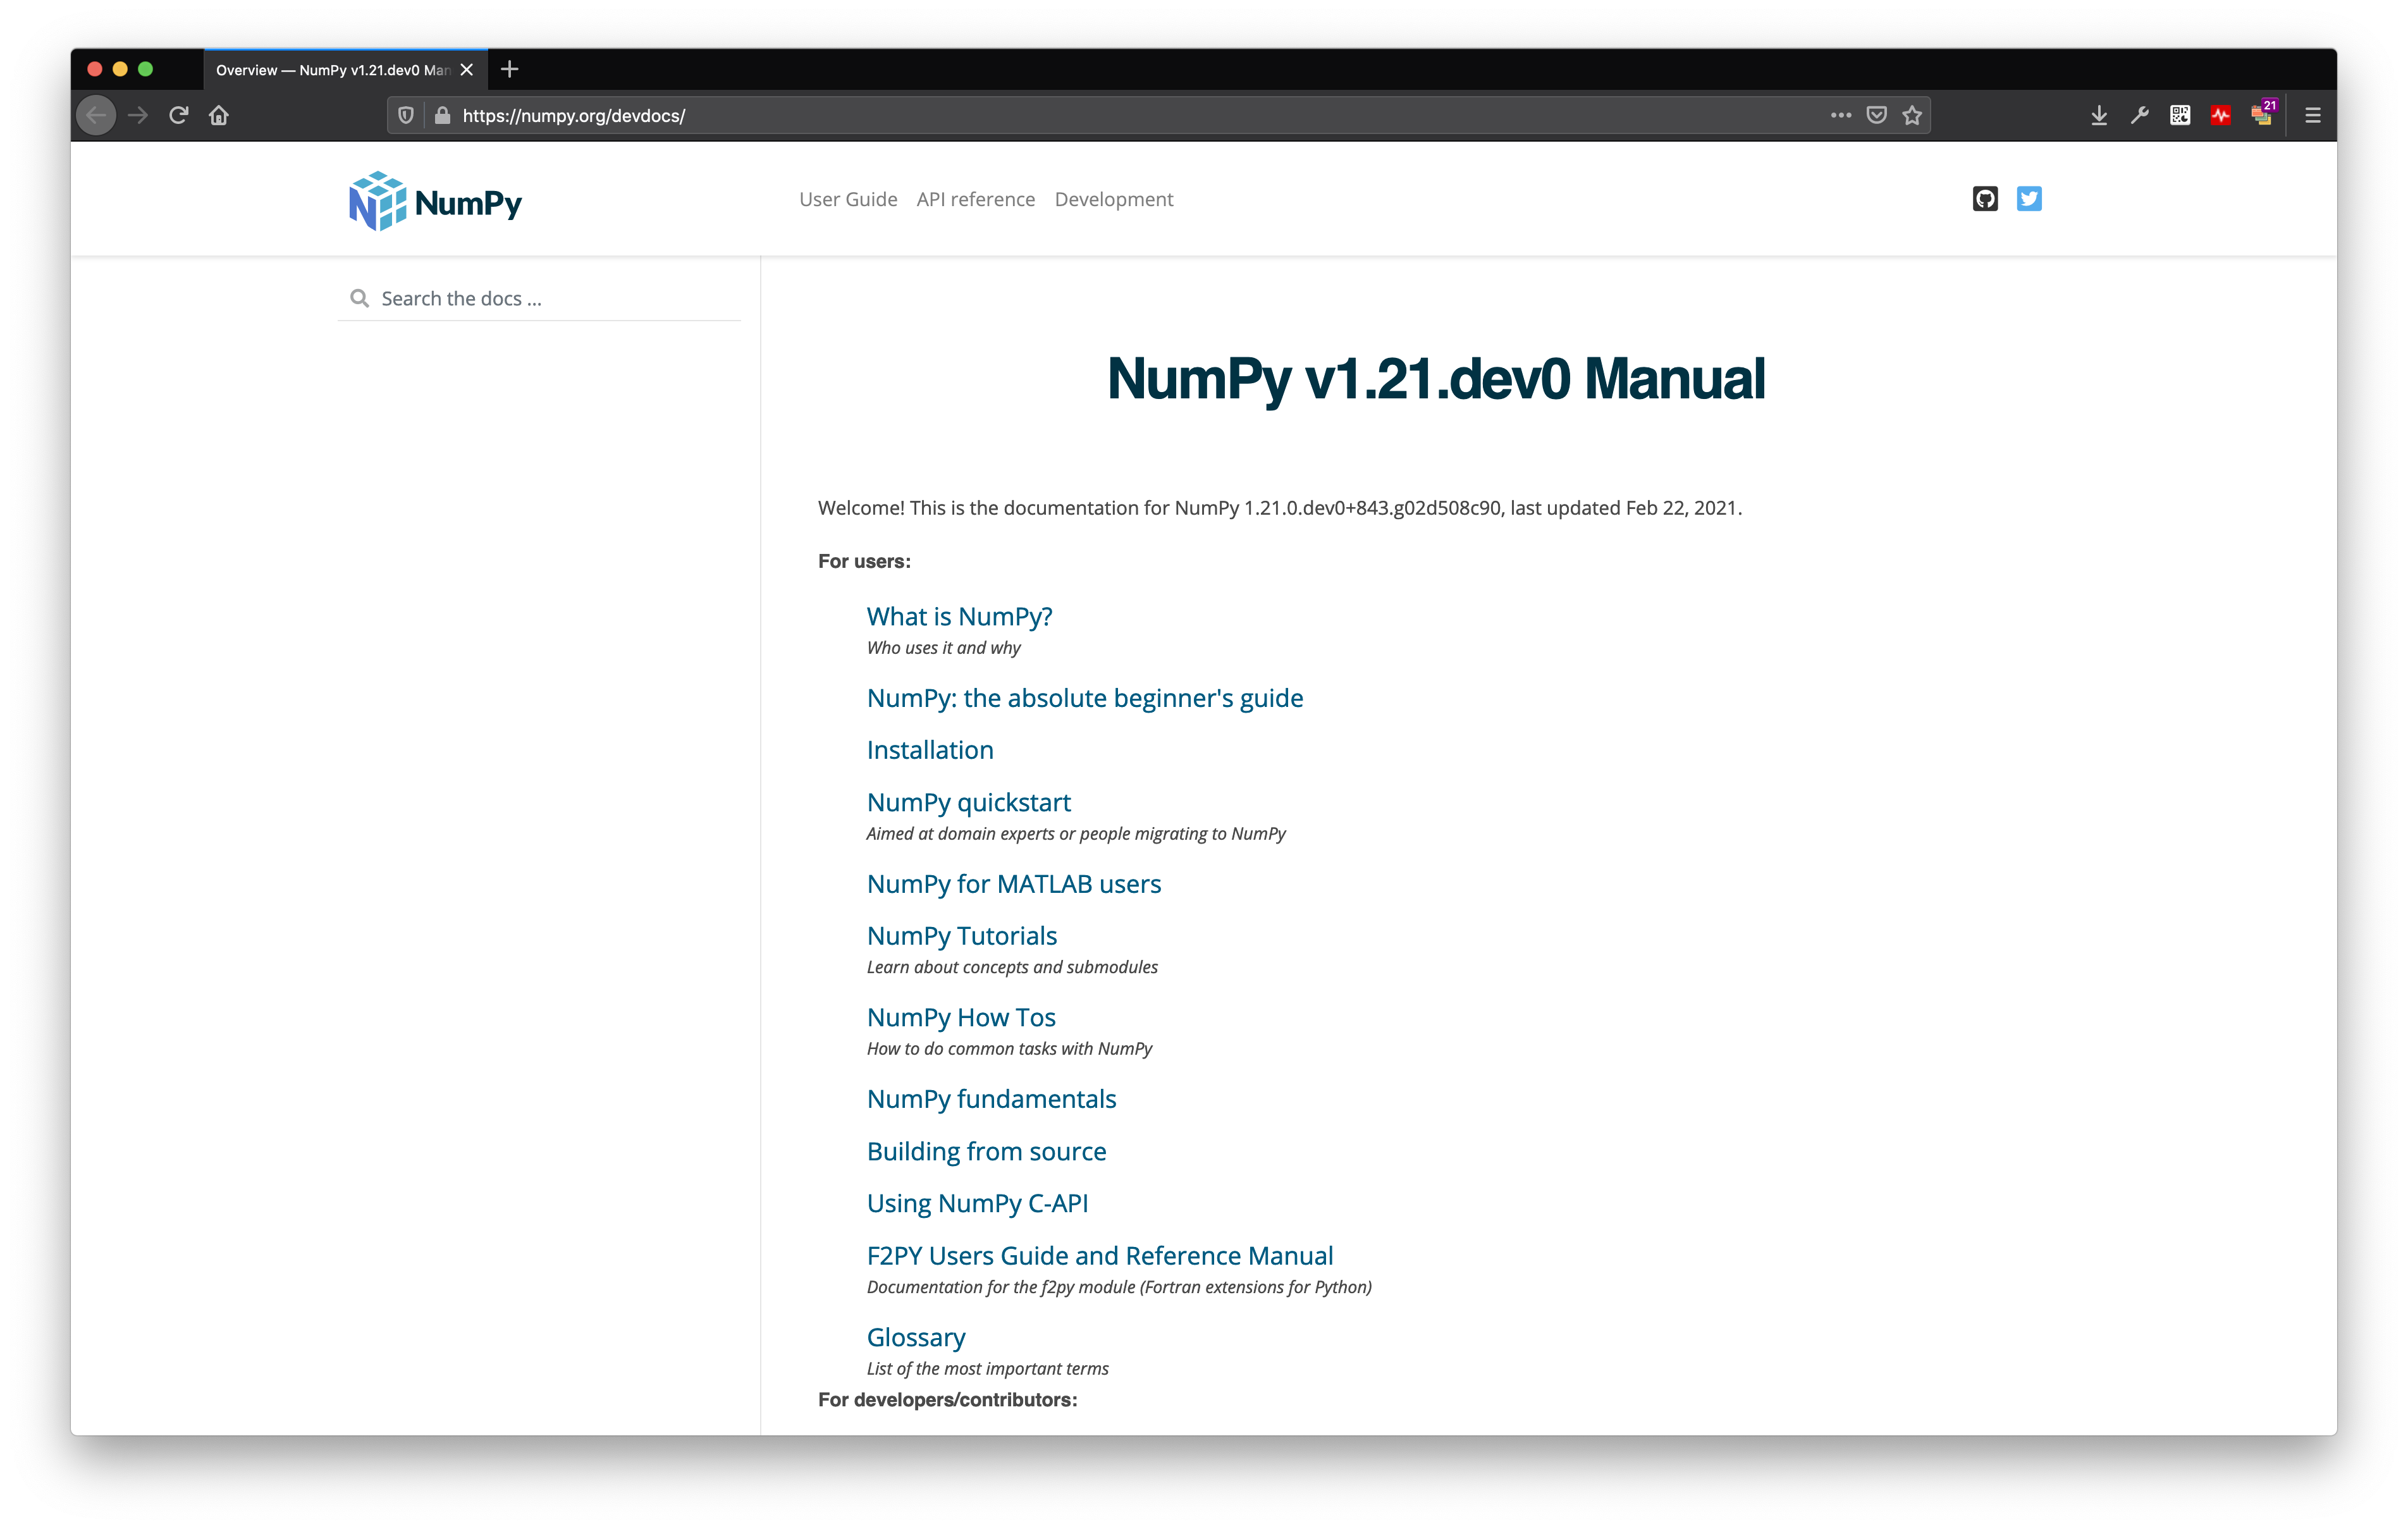 numpy distinguishes the 4 different documentation types